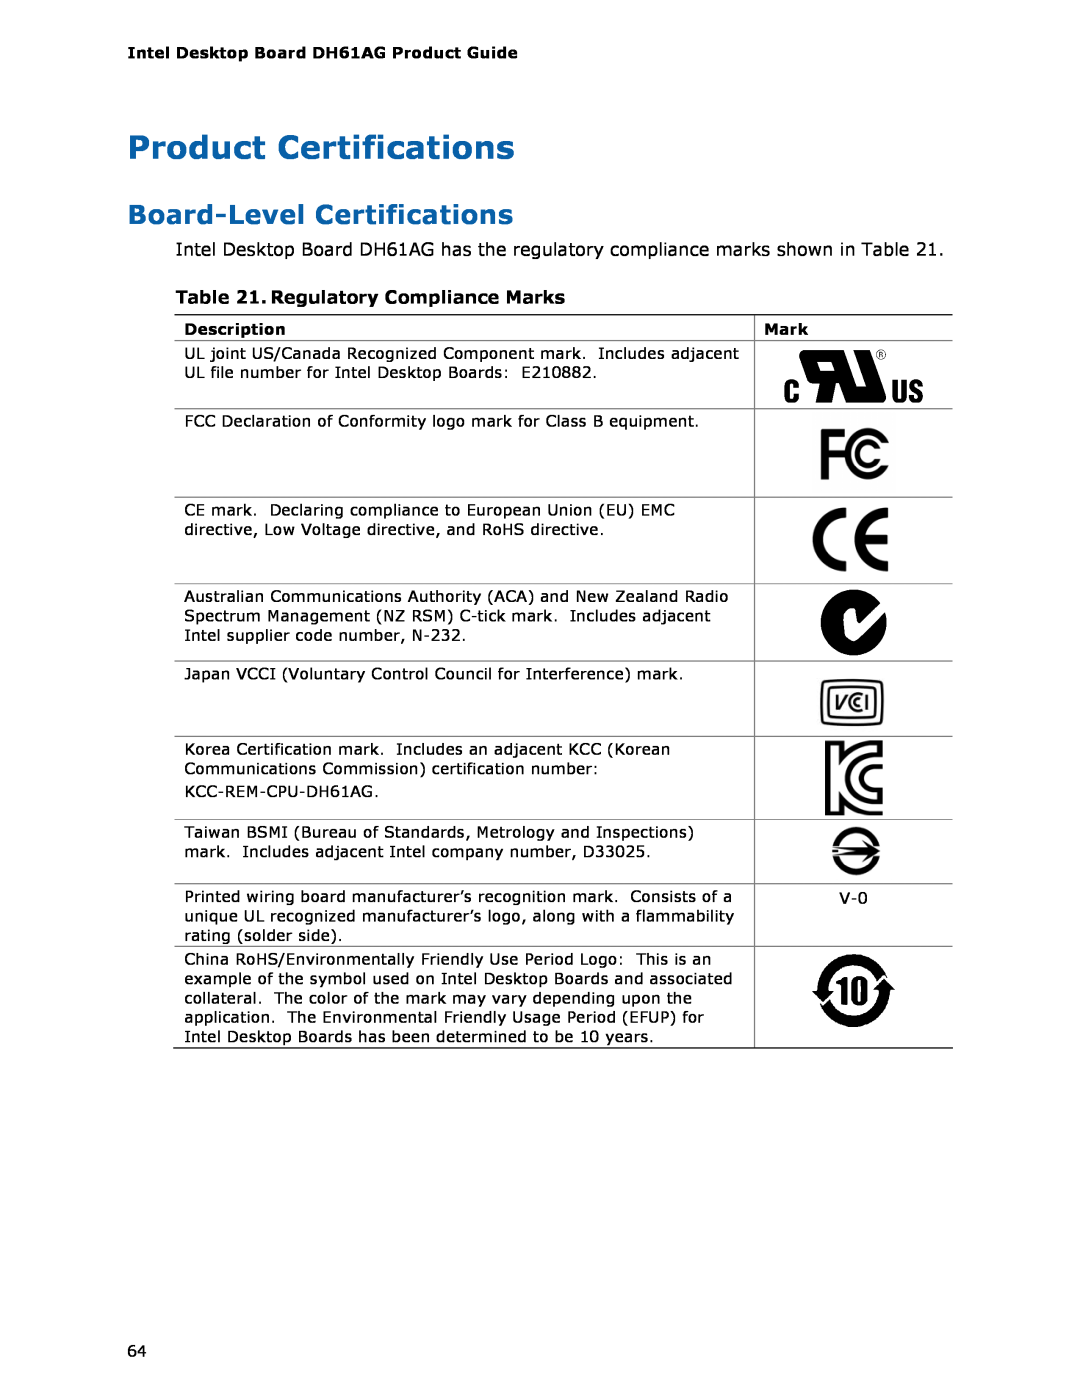 Intel BOXDH61AG manual Product Certifications, Board-Level Certifications, Regulatory Compliance Marks 